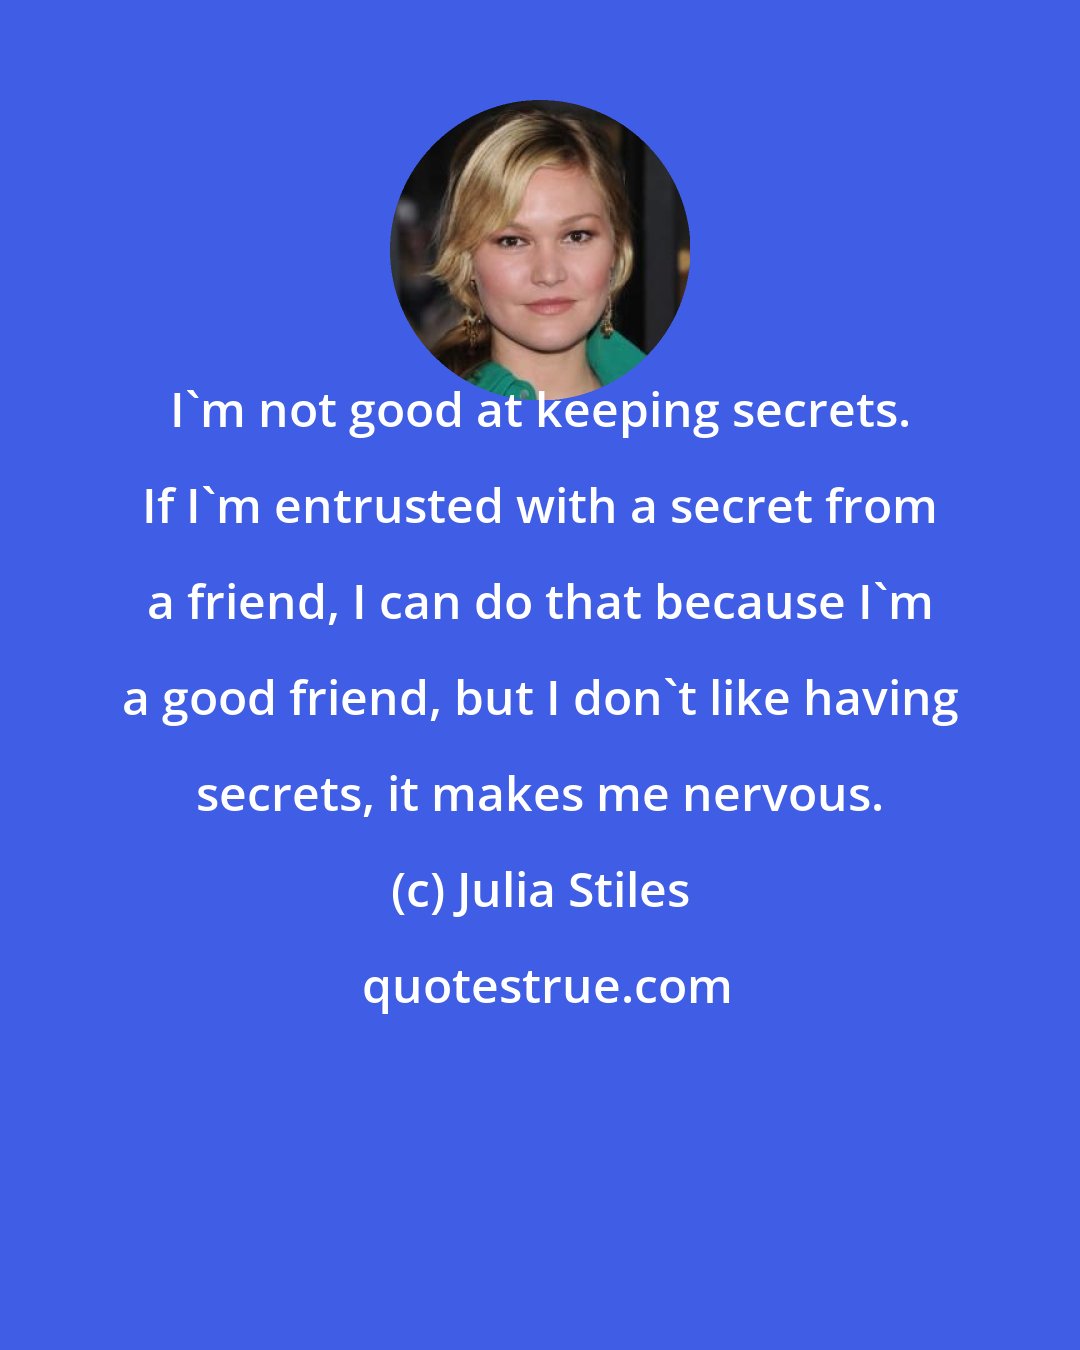 Julia Stiles: I'm not good at keeping secrets. If I'm entrusted with a secret from a friend, I can do that because I'm a good friend, but I don't like having secrets, it makes me nervous.